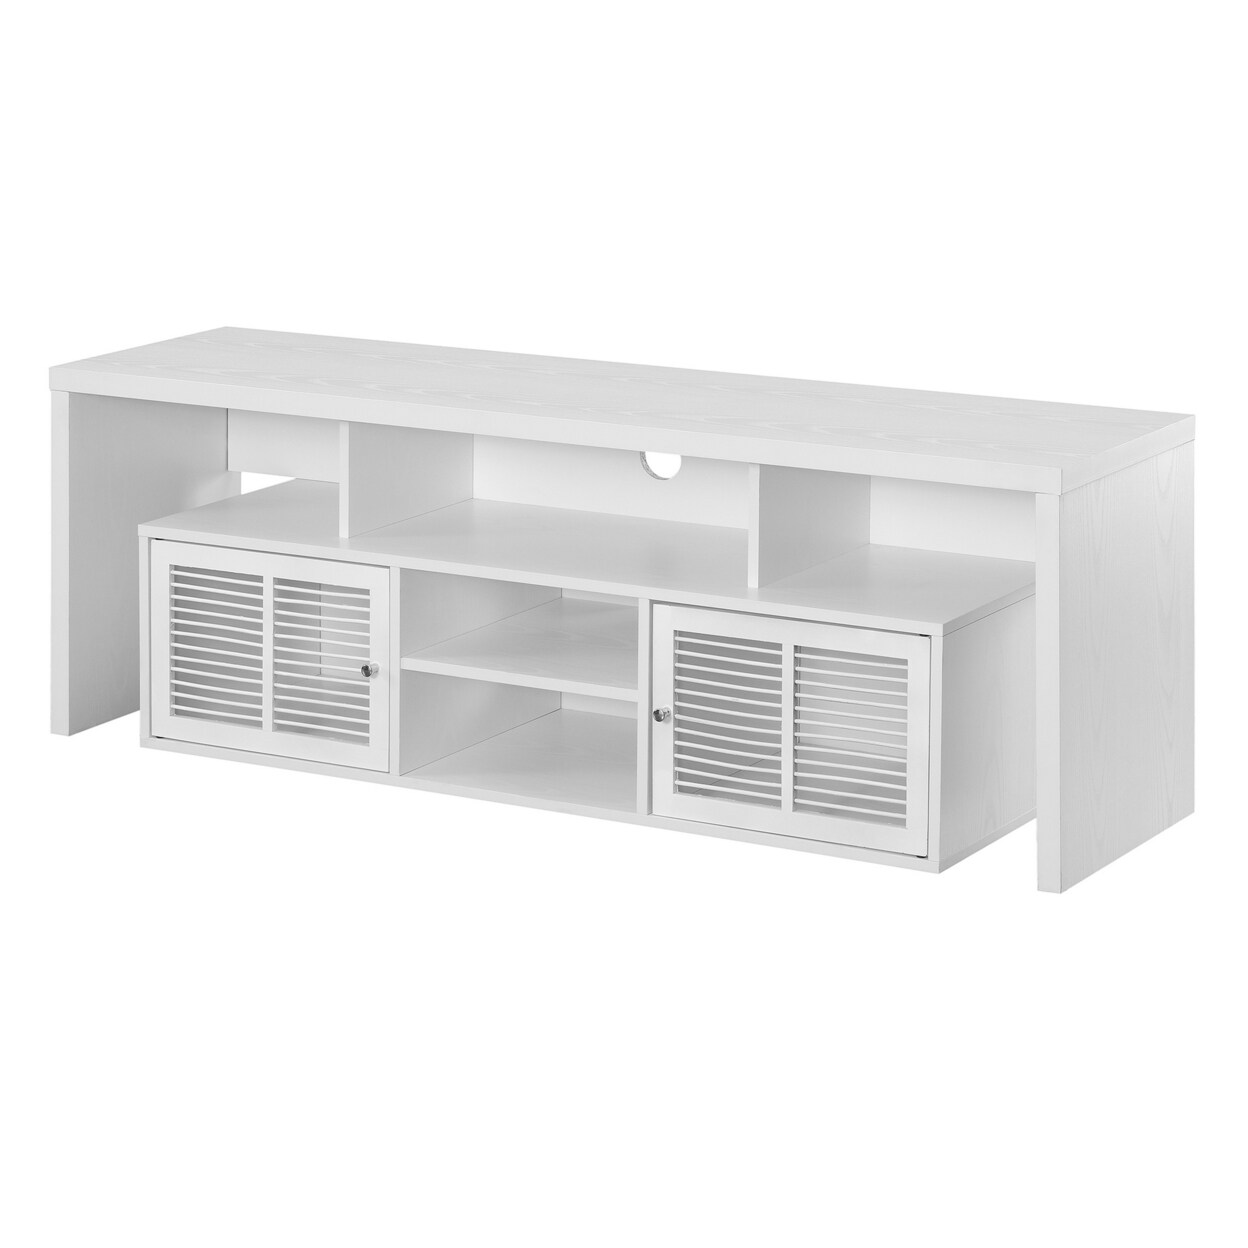 Convenience Concepts Lexington 60 inch TV Stand with Storage Cabinets and Shelves, White